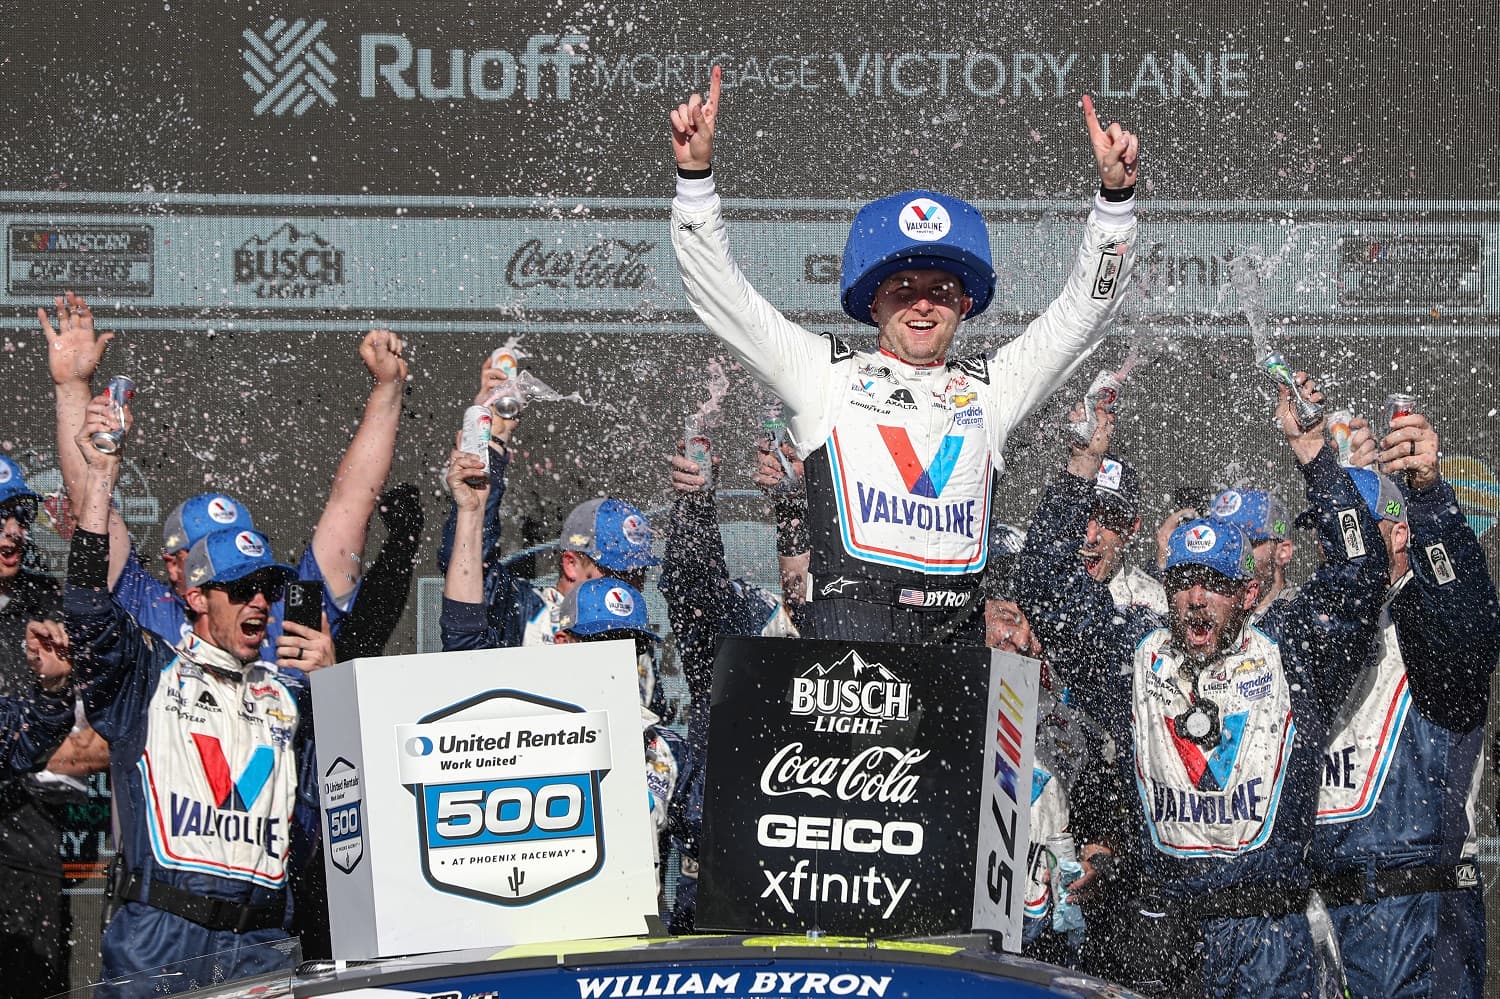 William Byron celebrates in Victory Lane after winning the NASCAR Cup Series United Rentals Work United 500 at Phoenix Raceway on March 12, 2023.